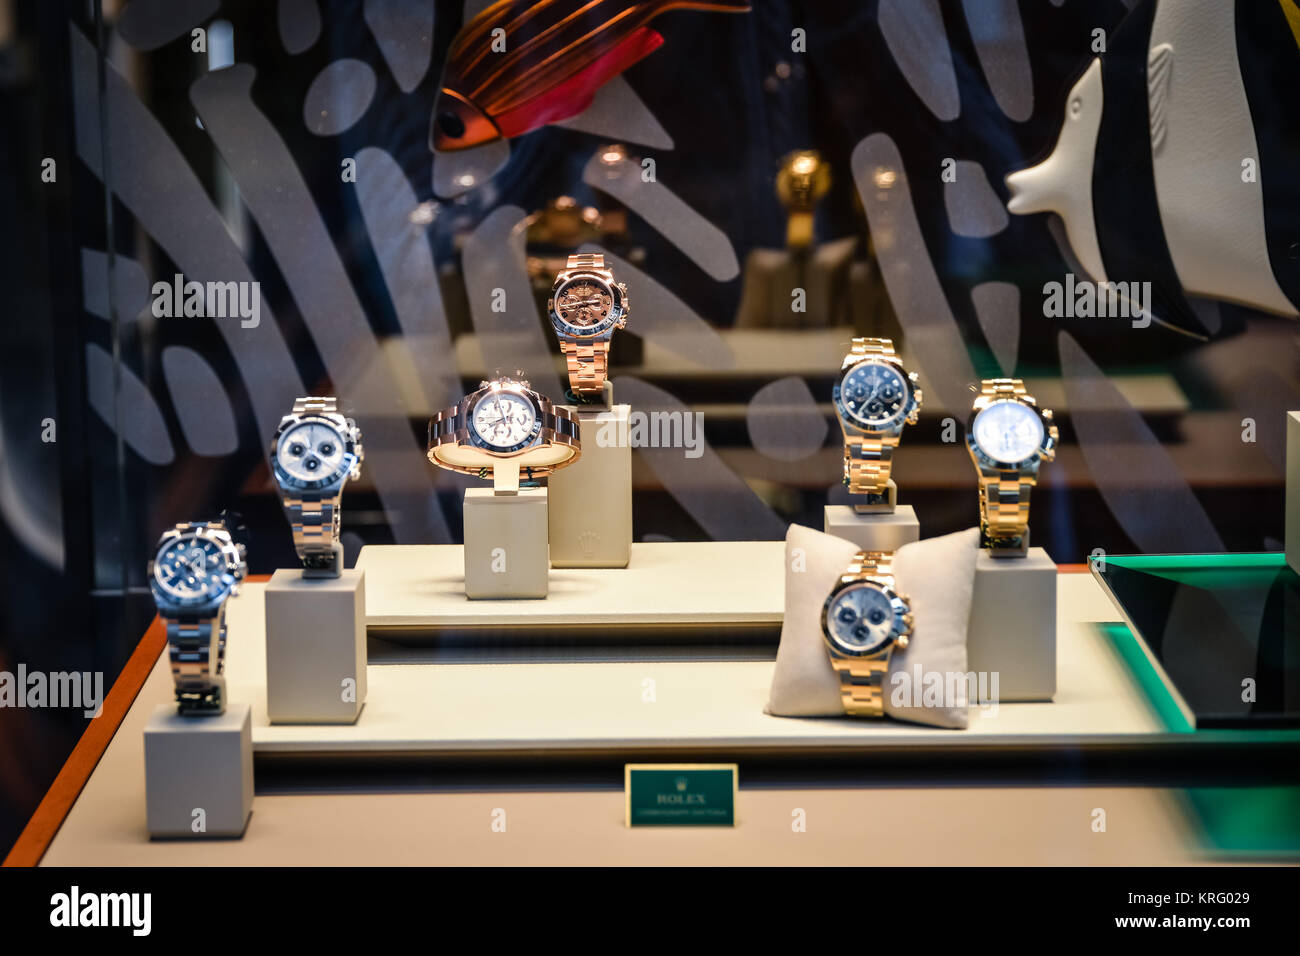 Page 3 - Rolex Style High Resolution Stock Photography and Images - Alamy